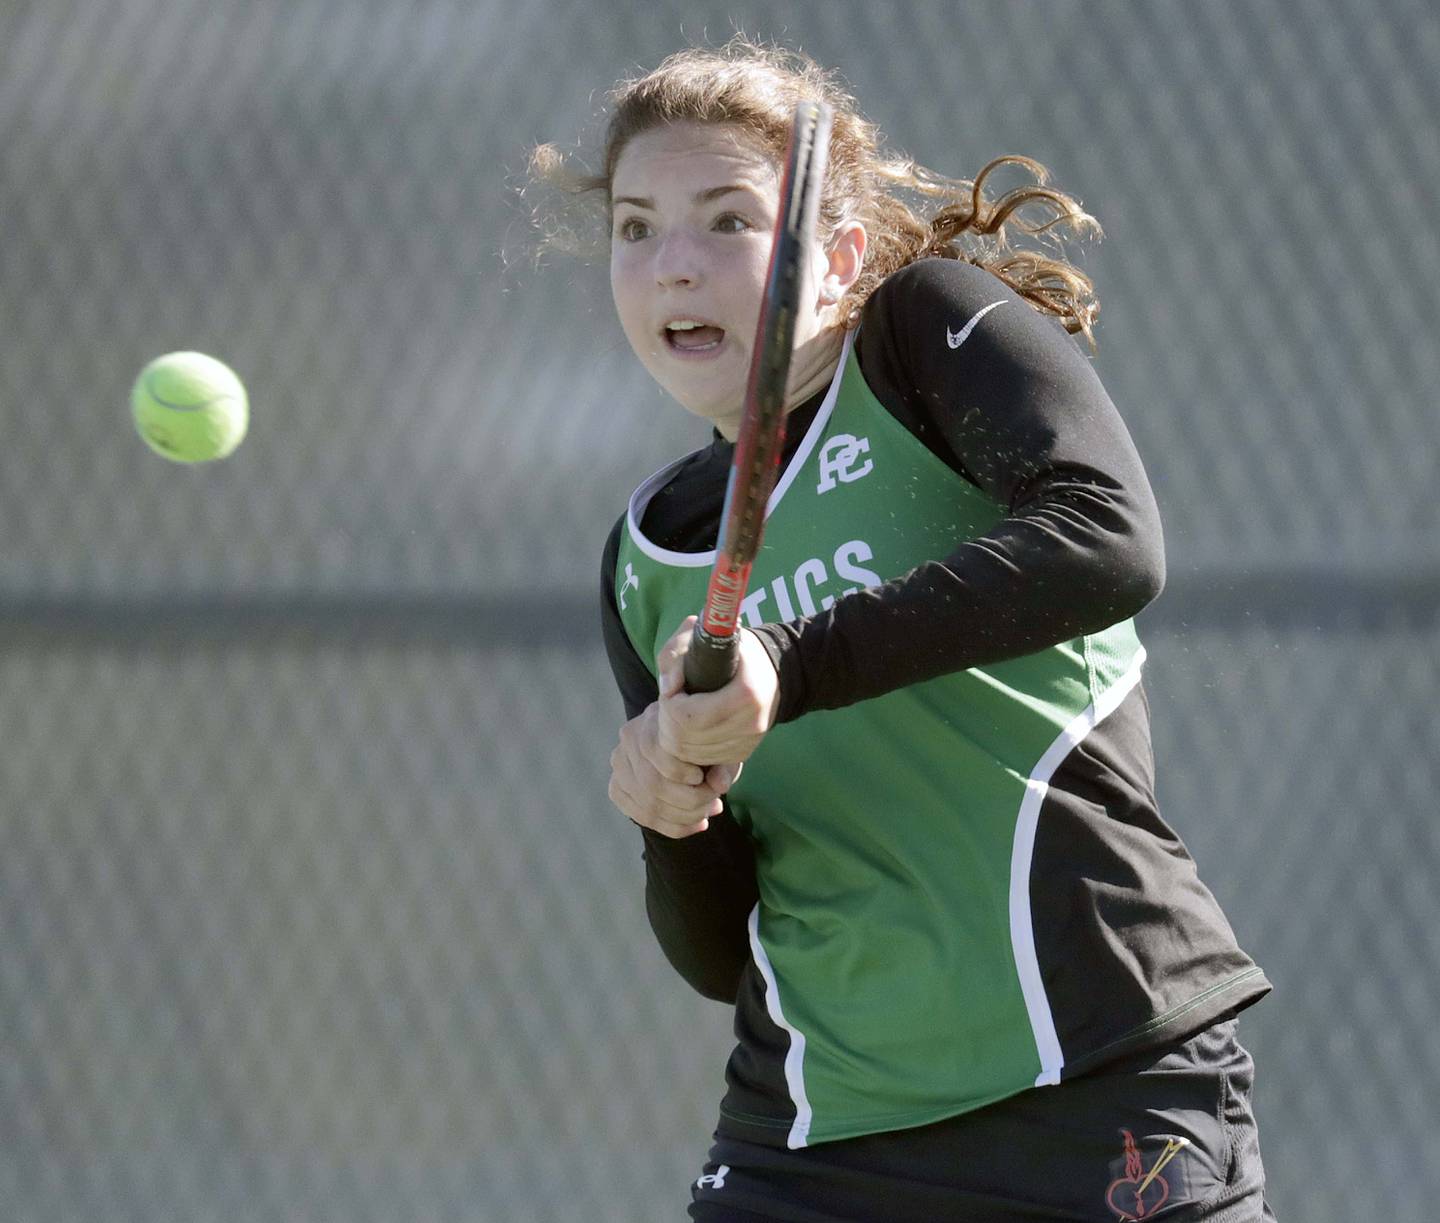 Providence Catholic's Emma Davis returns a shot as she plays Chicago University's Emma Baker in the 1A singles championship match at the IHSA State girls tennis finals at Buffalo Grove High School Saturday October 23, 2021.